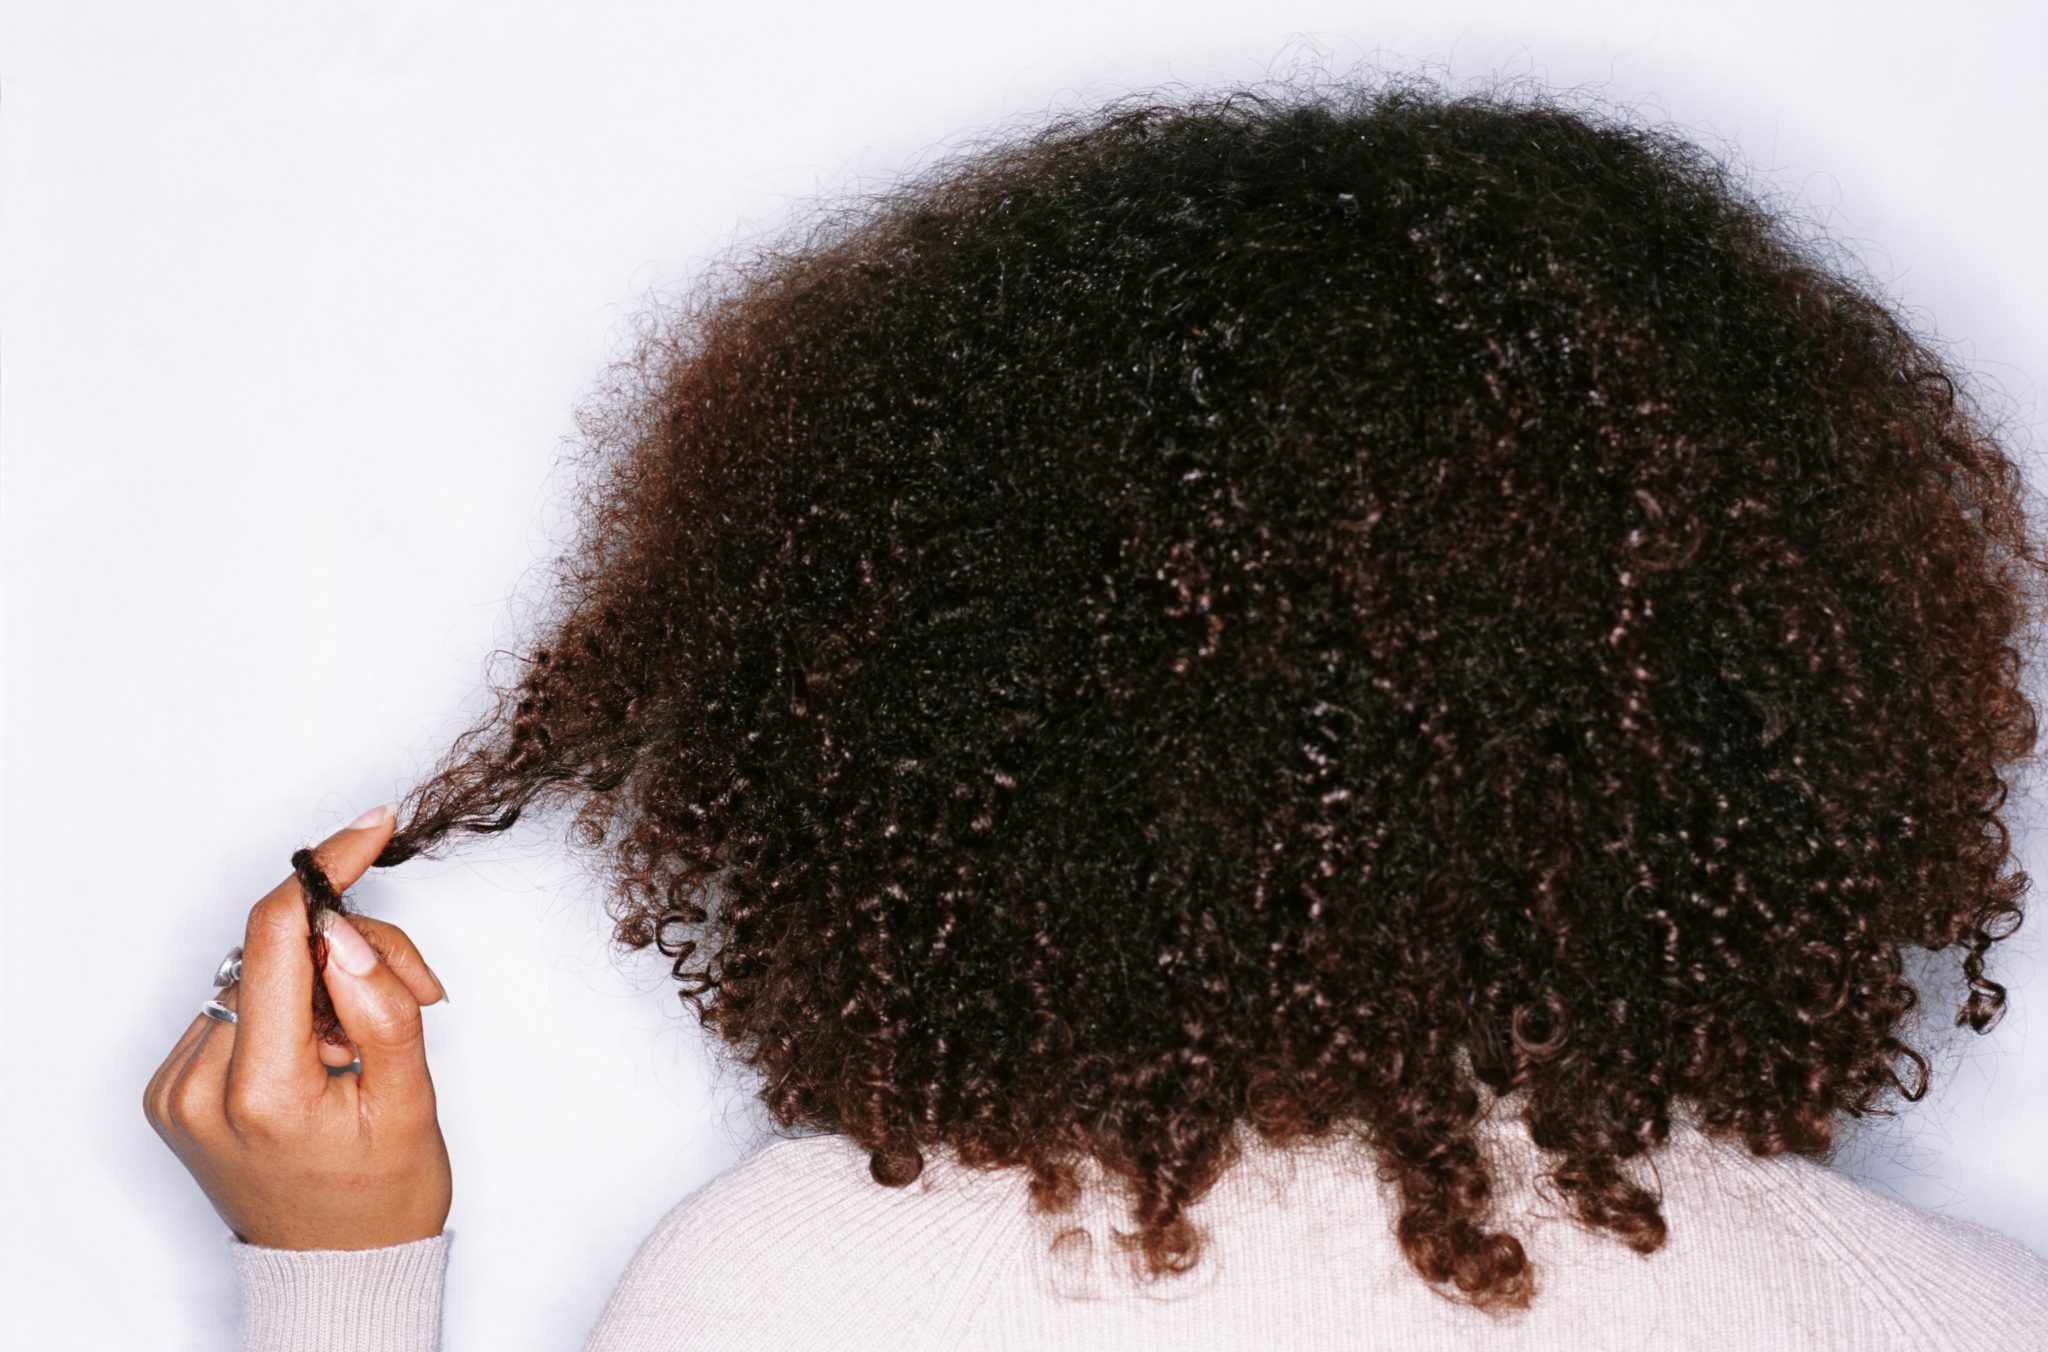 The best afro hair products for kinks, coils and twists in 2021